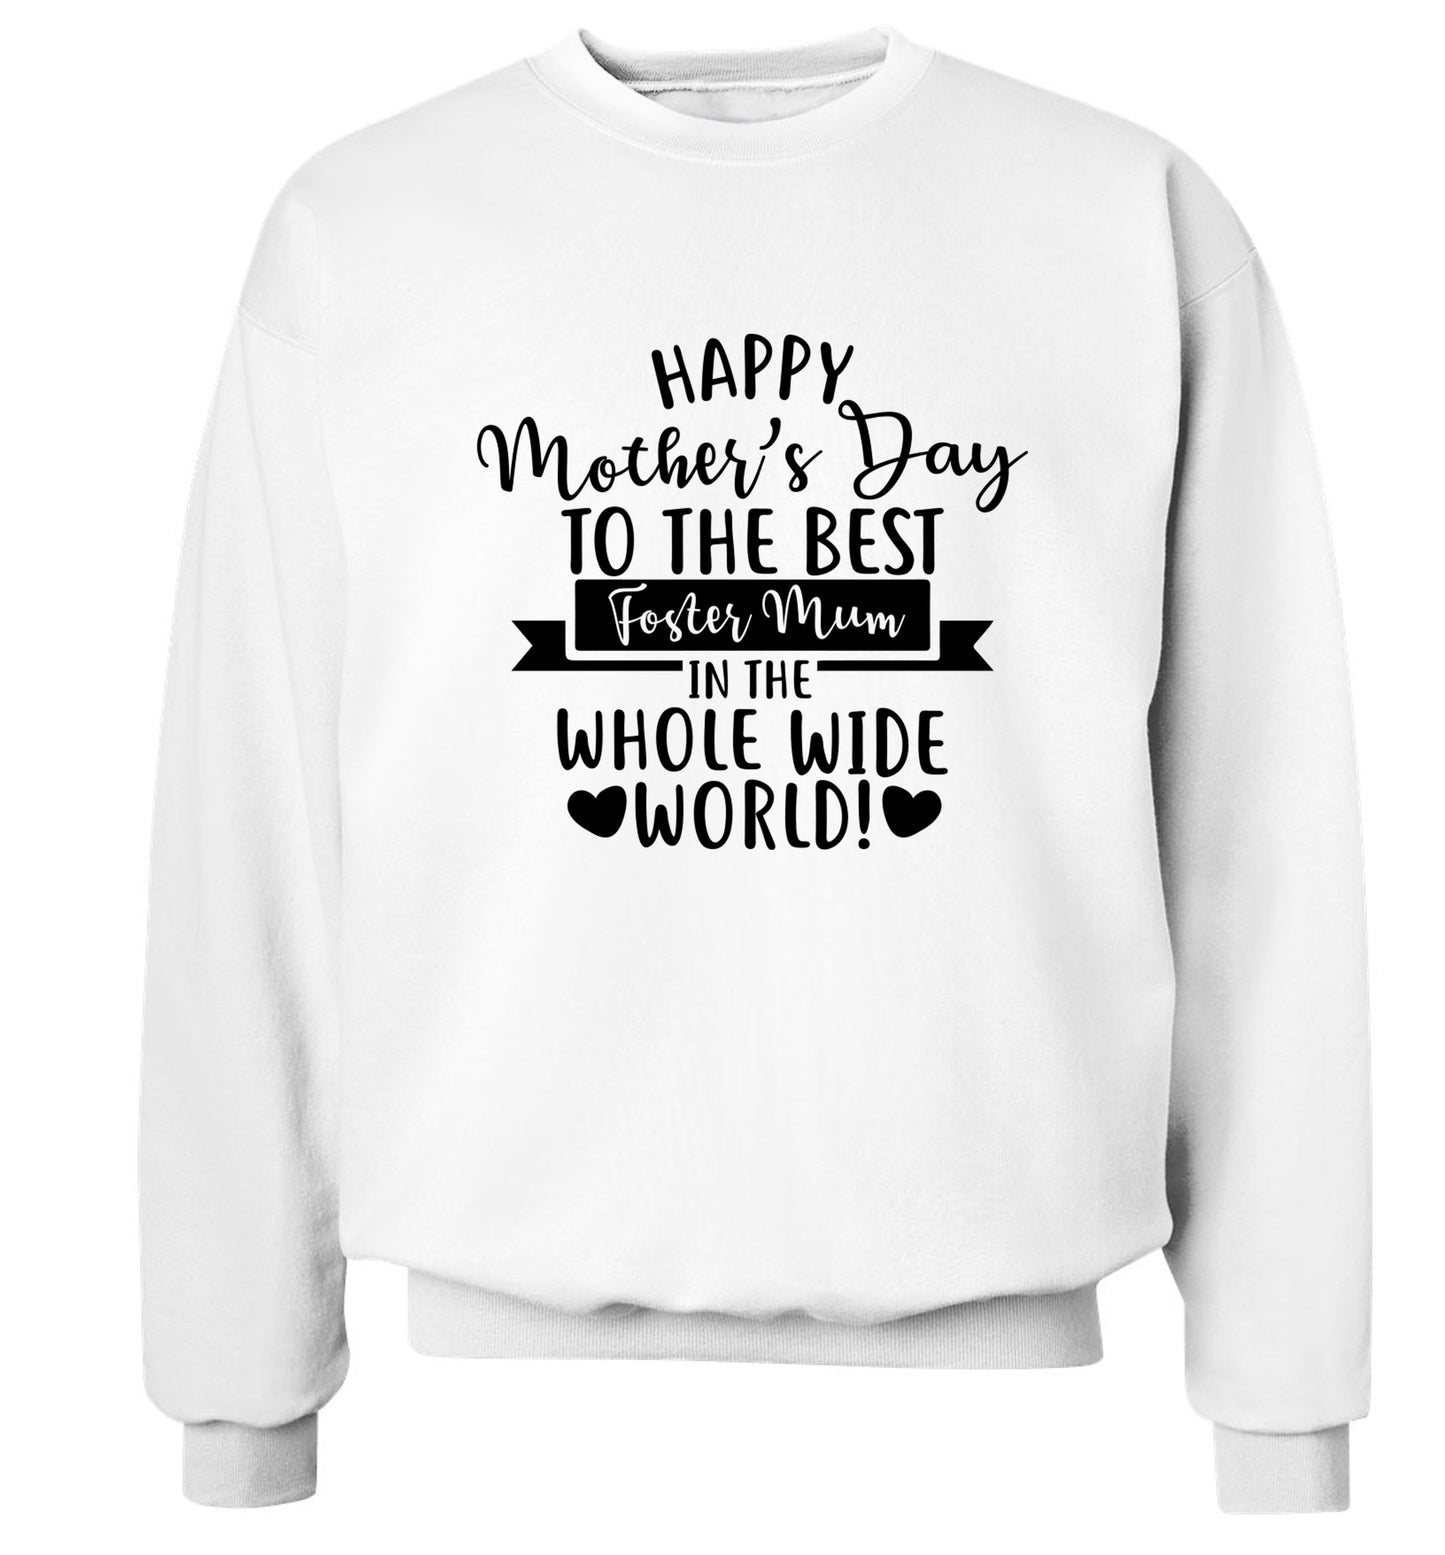 Happy mother's day to the best foster mum in the world Adult's unisex white Sweater 2XL